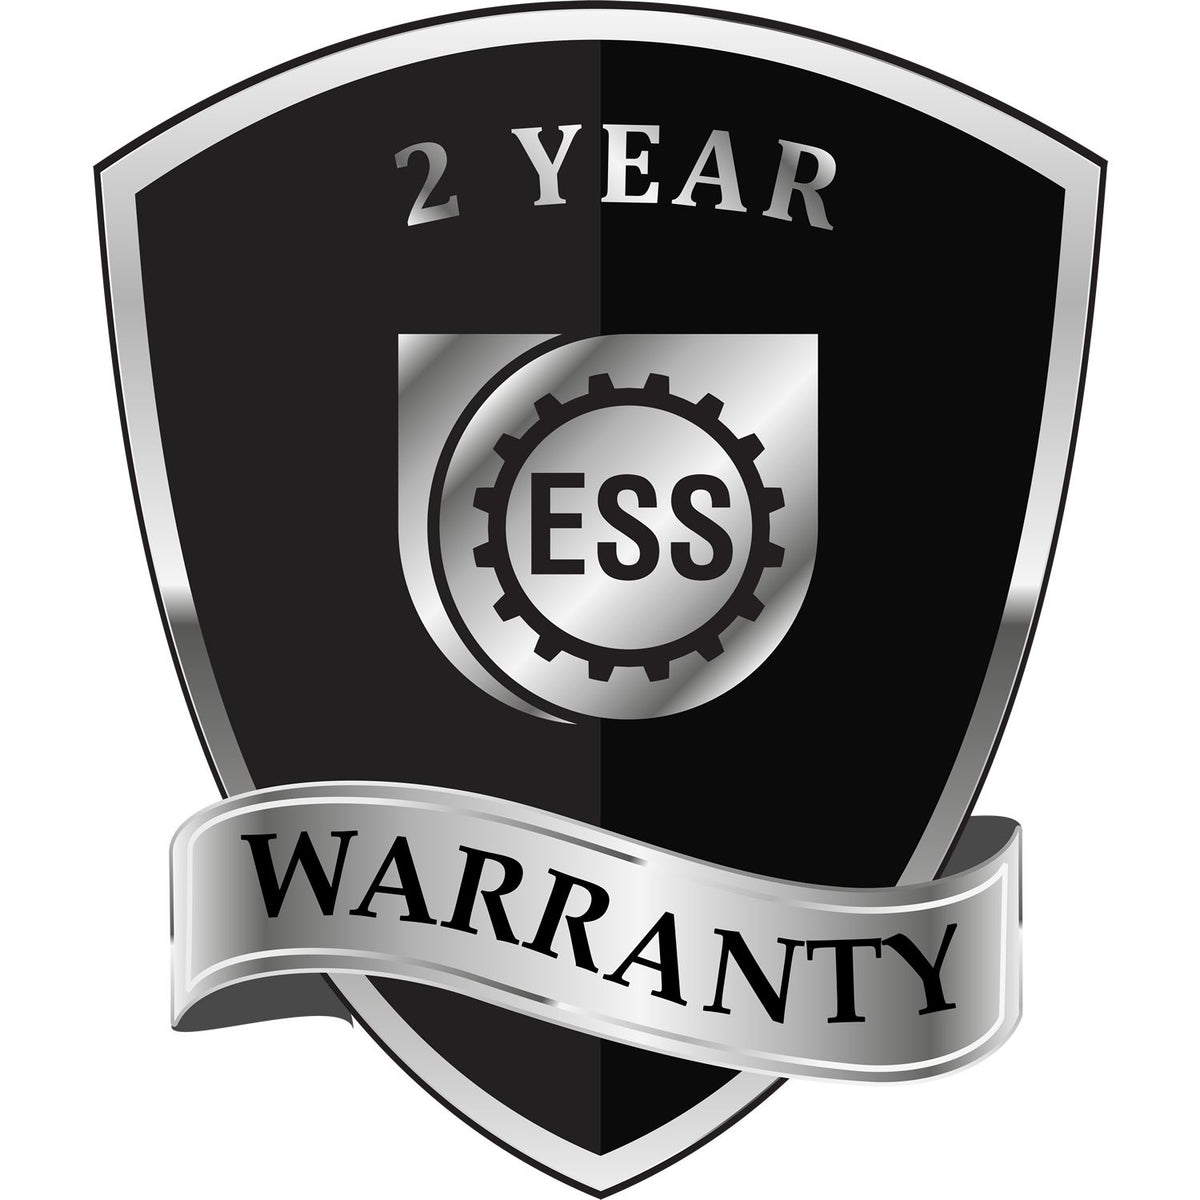 A badge or emblem showing a warranty icon for the State of New Jersey Extended Long Reach Engineer Seal